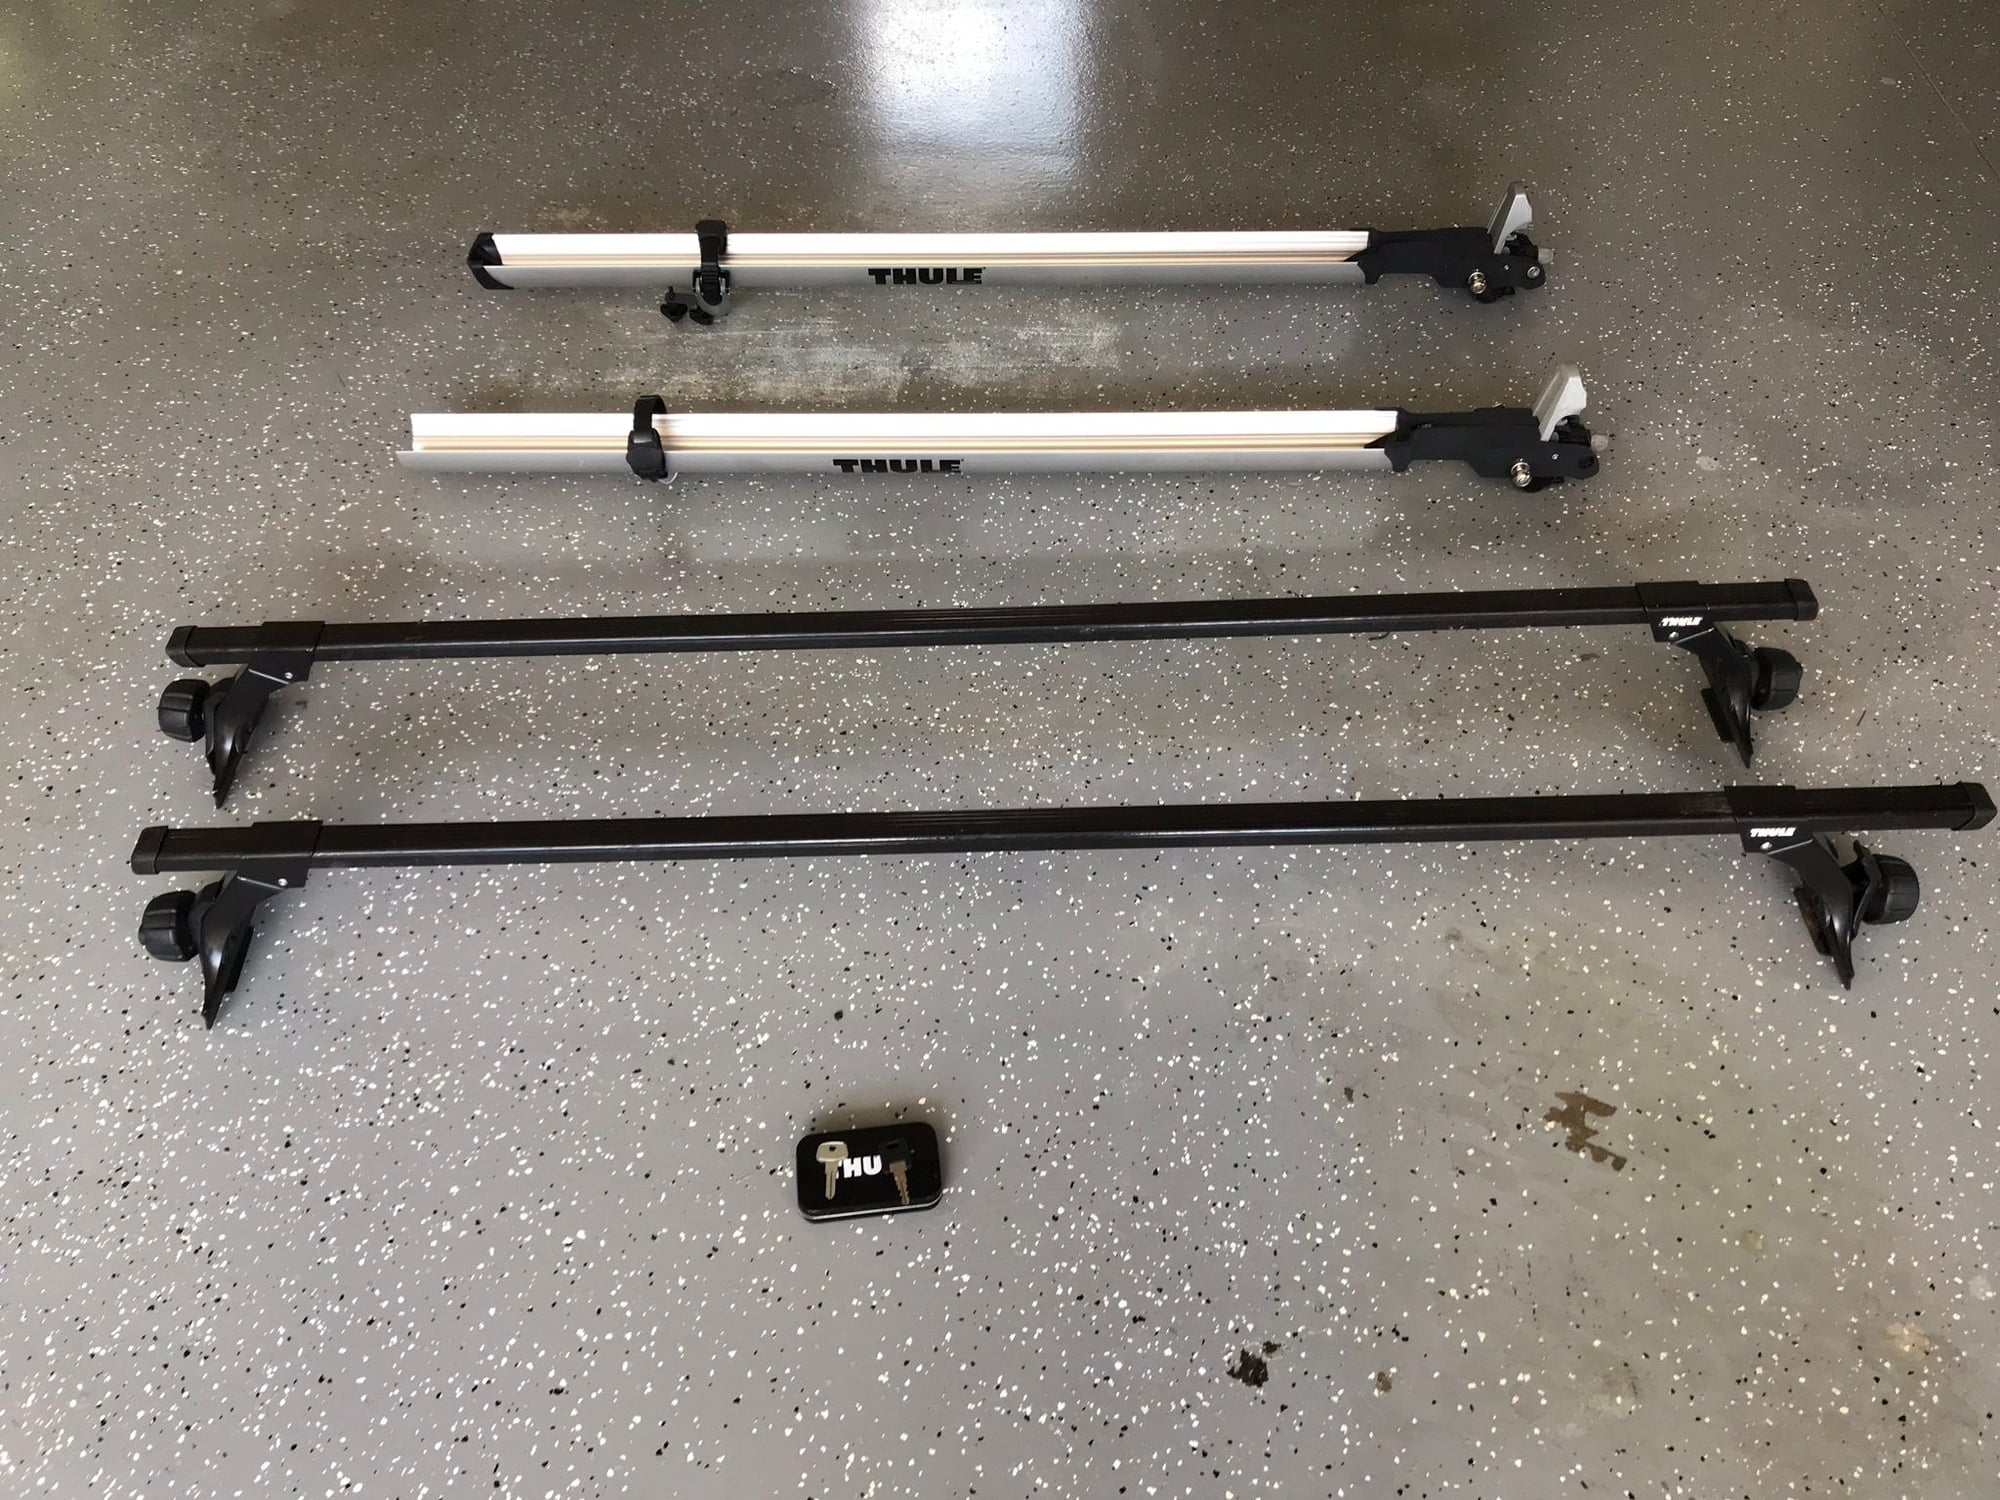 Accessories - Thule Bicycle Roof Racks for JK Unlimited - Used - Greenwood, SC 29649, United States